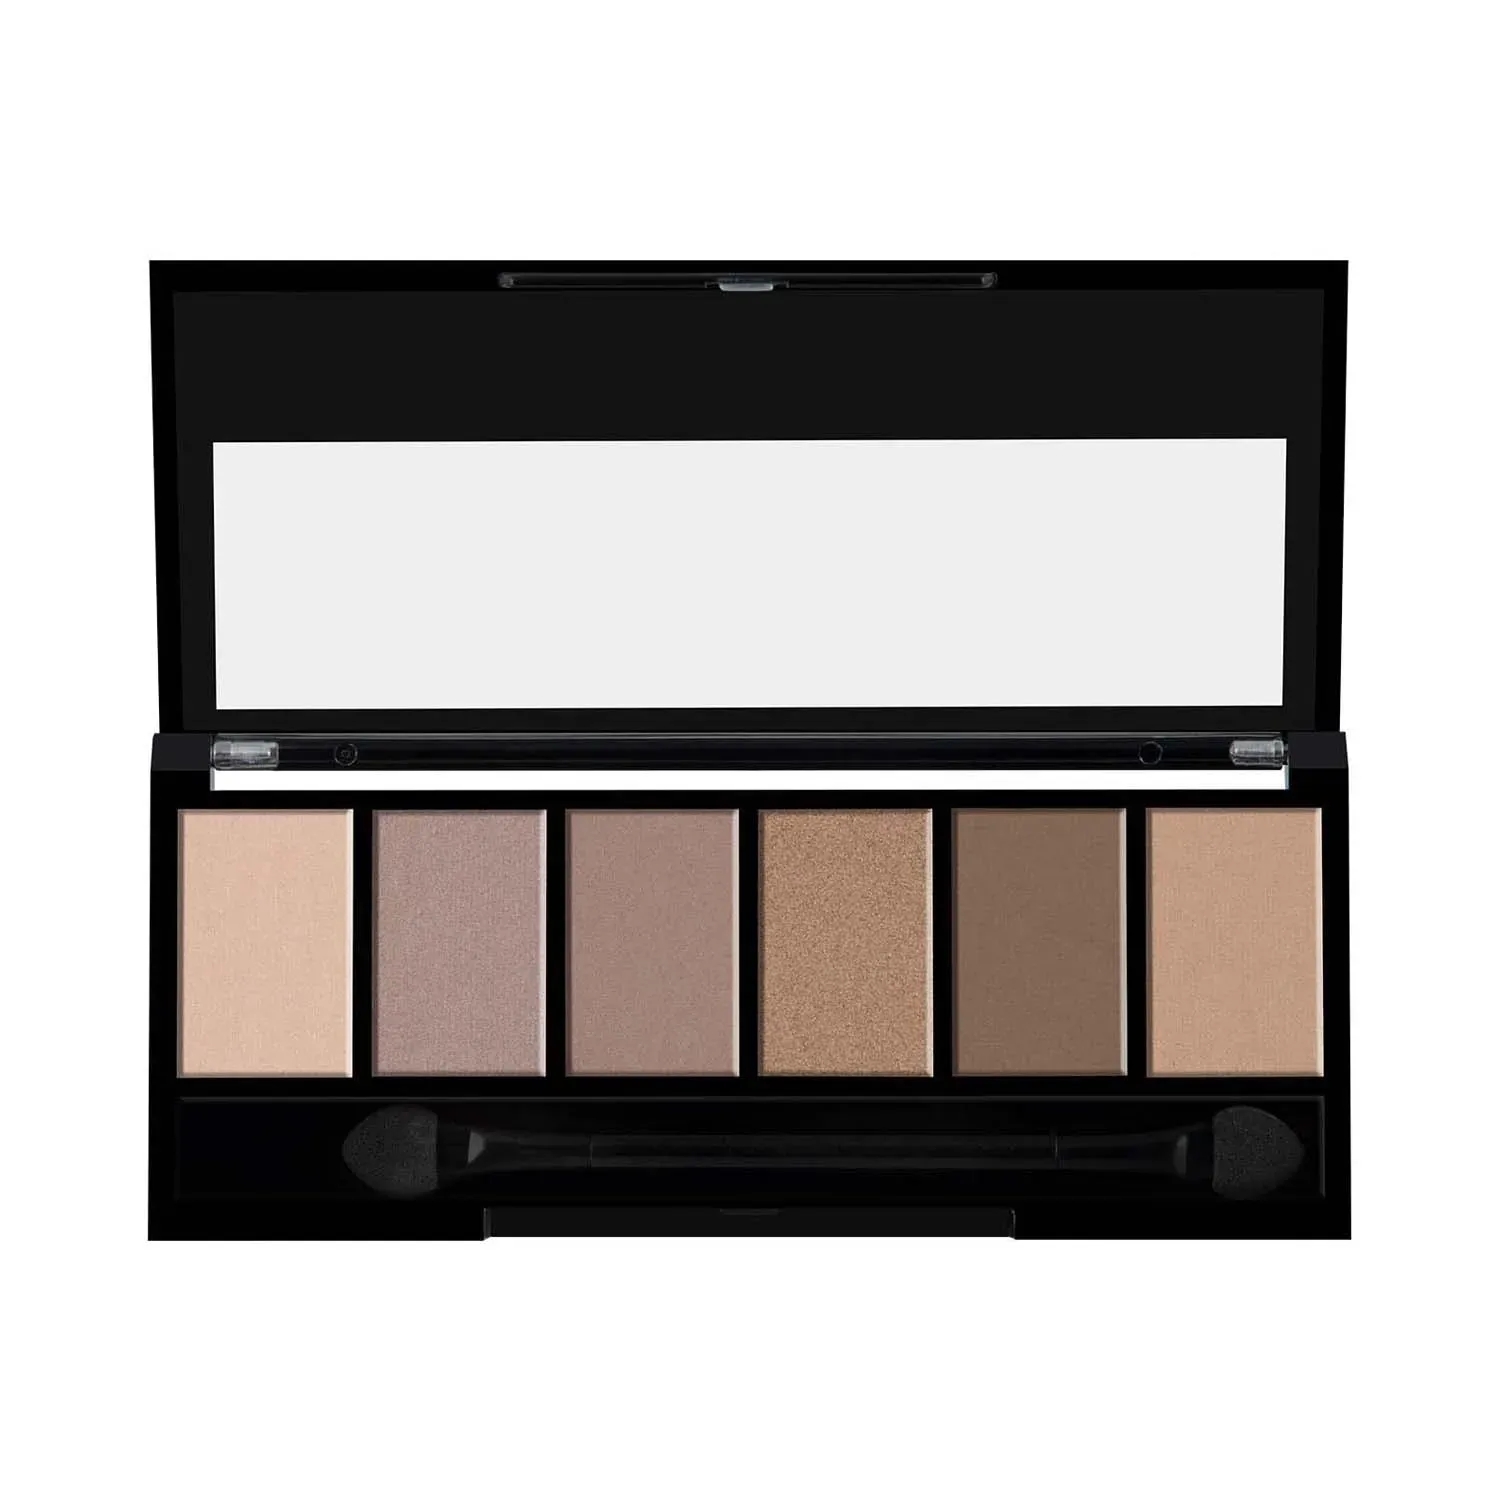 Miss Claire | Miss Claire Makeup Studio Eyeshadow Palette - 2 Naked (6g)